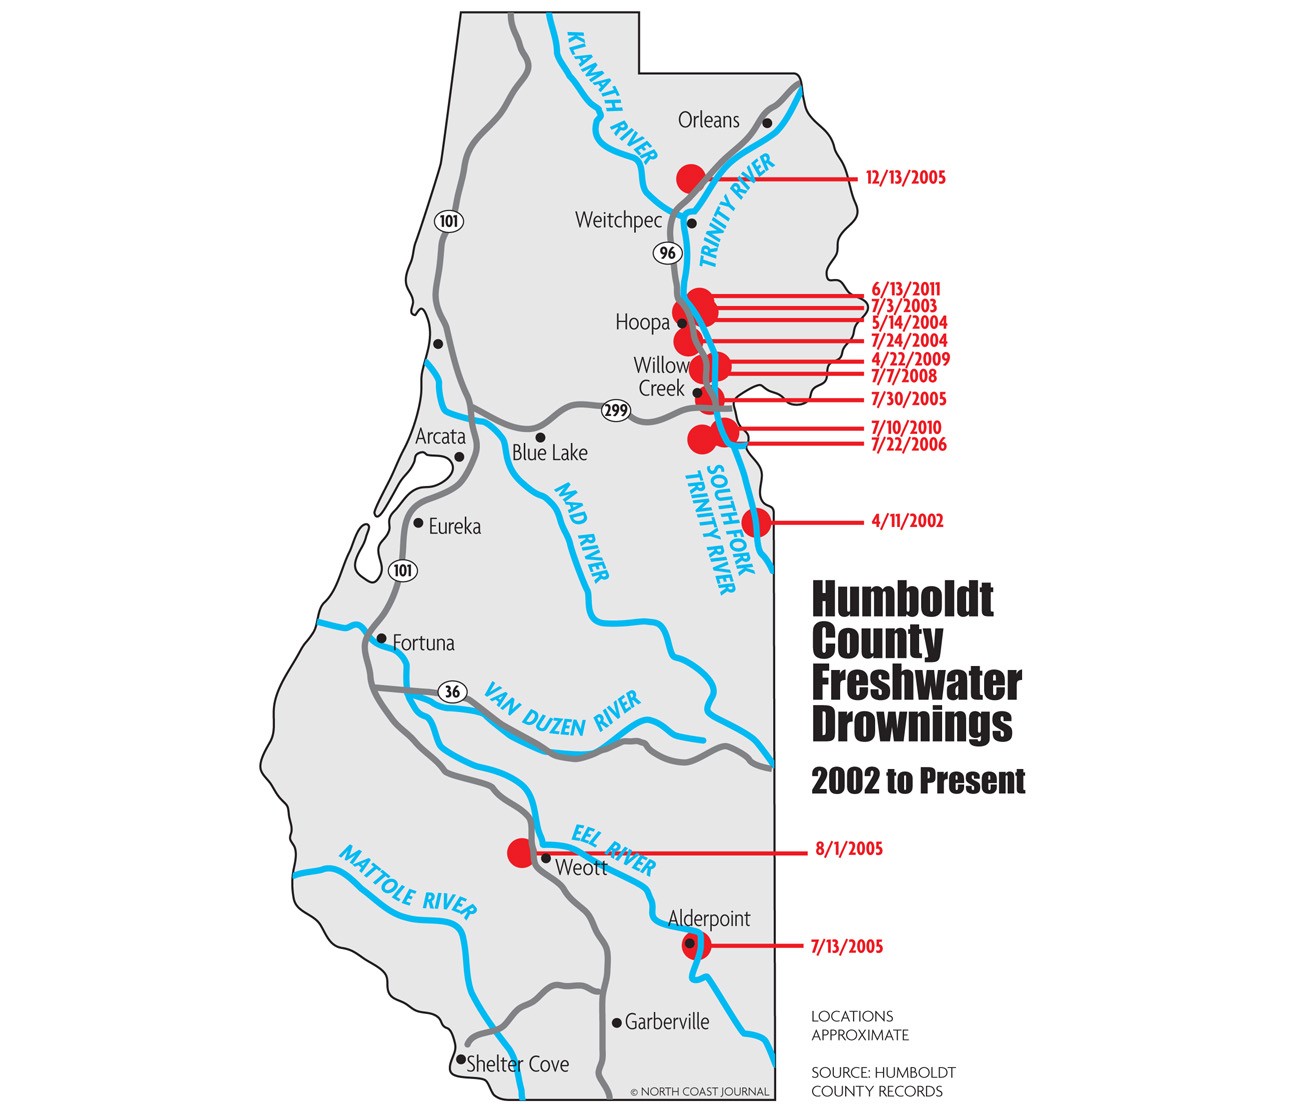 Humboldt County Freshwater Drownings - 2002 to Present